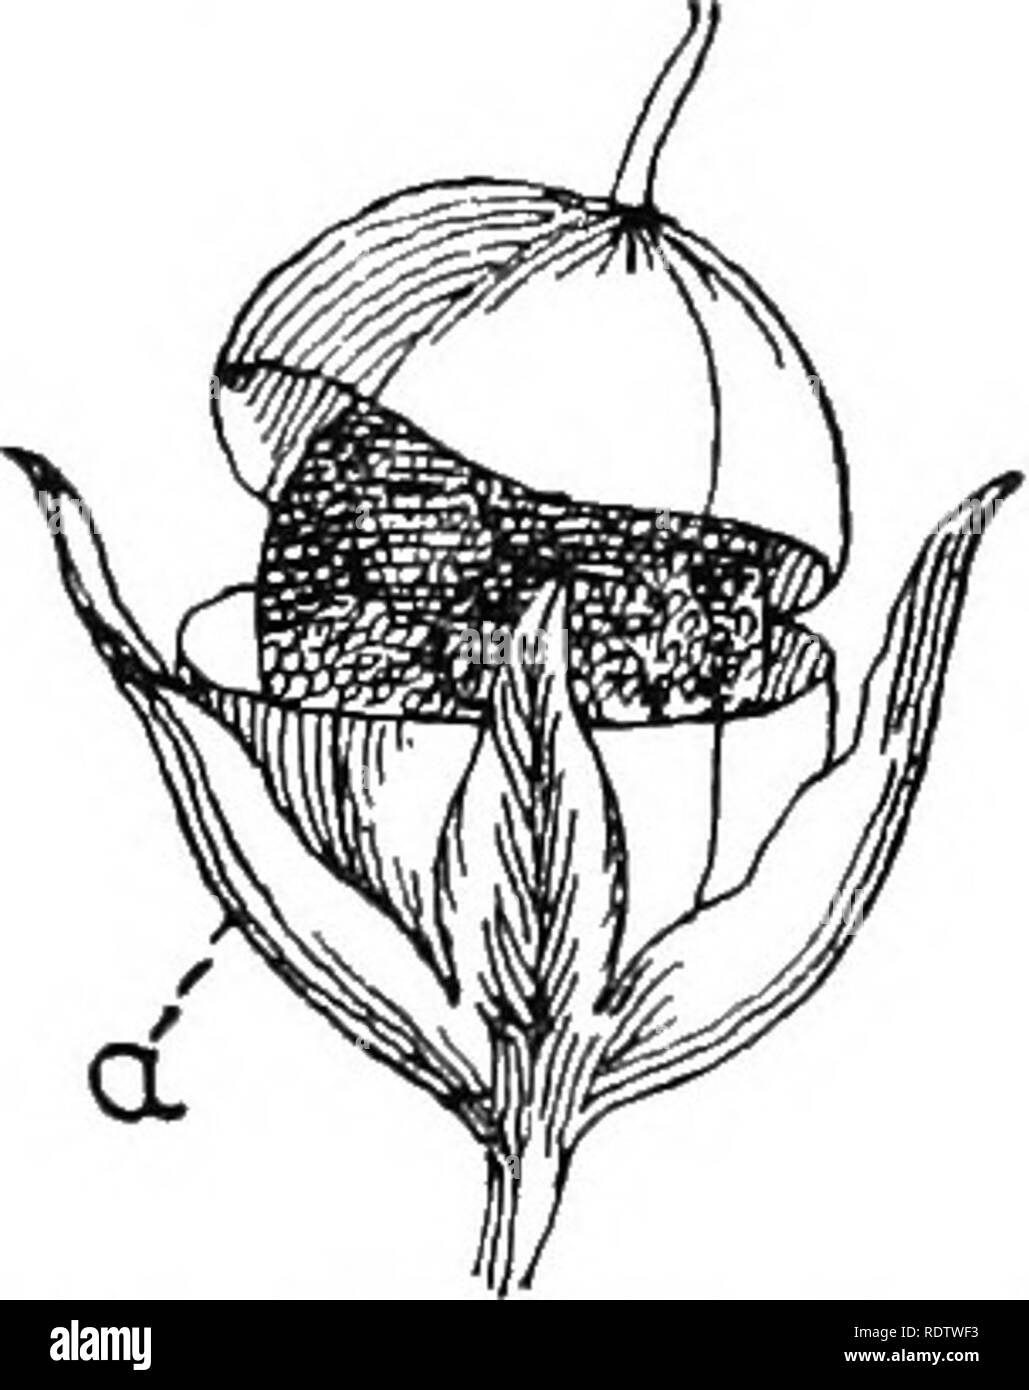 . British plants; their biology and ecology. Botany; Botany; Plant ecology. Fig. 86.—Porous Fig. 87.—Toothed Fig. 88.—Capsuie of Scab- Capsttle of Capsule of let Pimpeenel, splitting SuAPDEAQOif. Silene, tkansveksely. a, persistent calyx. smaller species they become two- or even one-seeded— e.g., M. lupulina. In other cases the pod becomes separated into one-seeded sections by transverse parti- tions, forming a jointed pod, or lomentum. These split off consecutively, beginning at the top, and releasing the seeds one by one—e.g., sainfoin (Fig. 91). In the radish the sHiqua similarly becomes ma Stock Photo